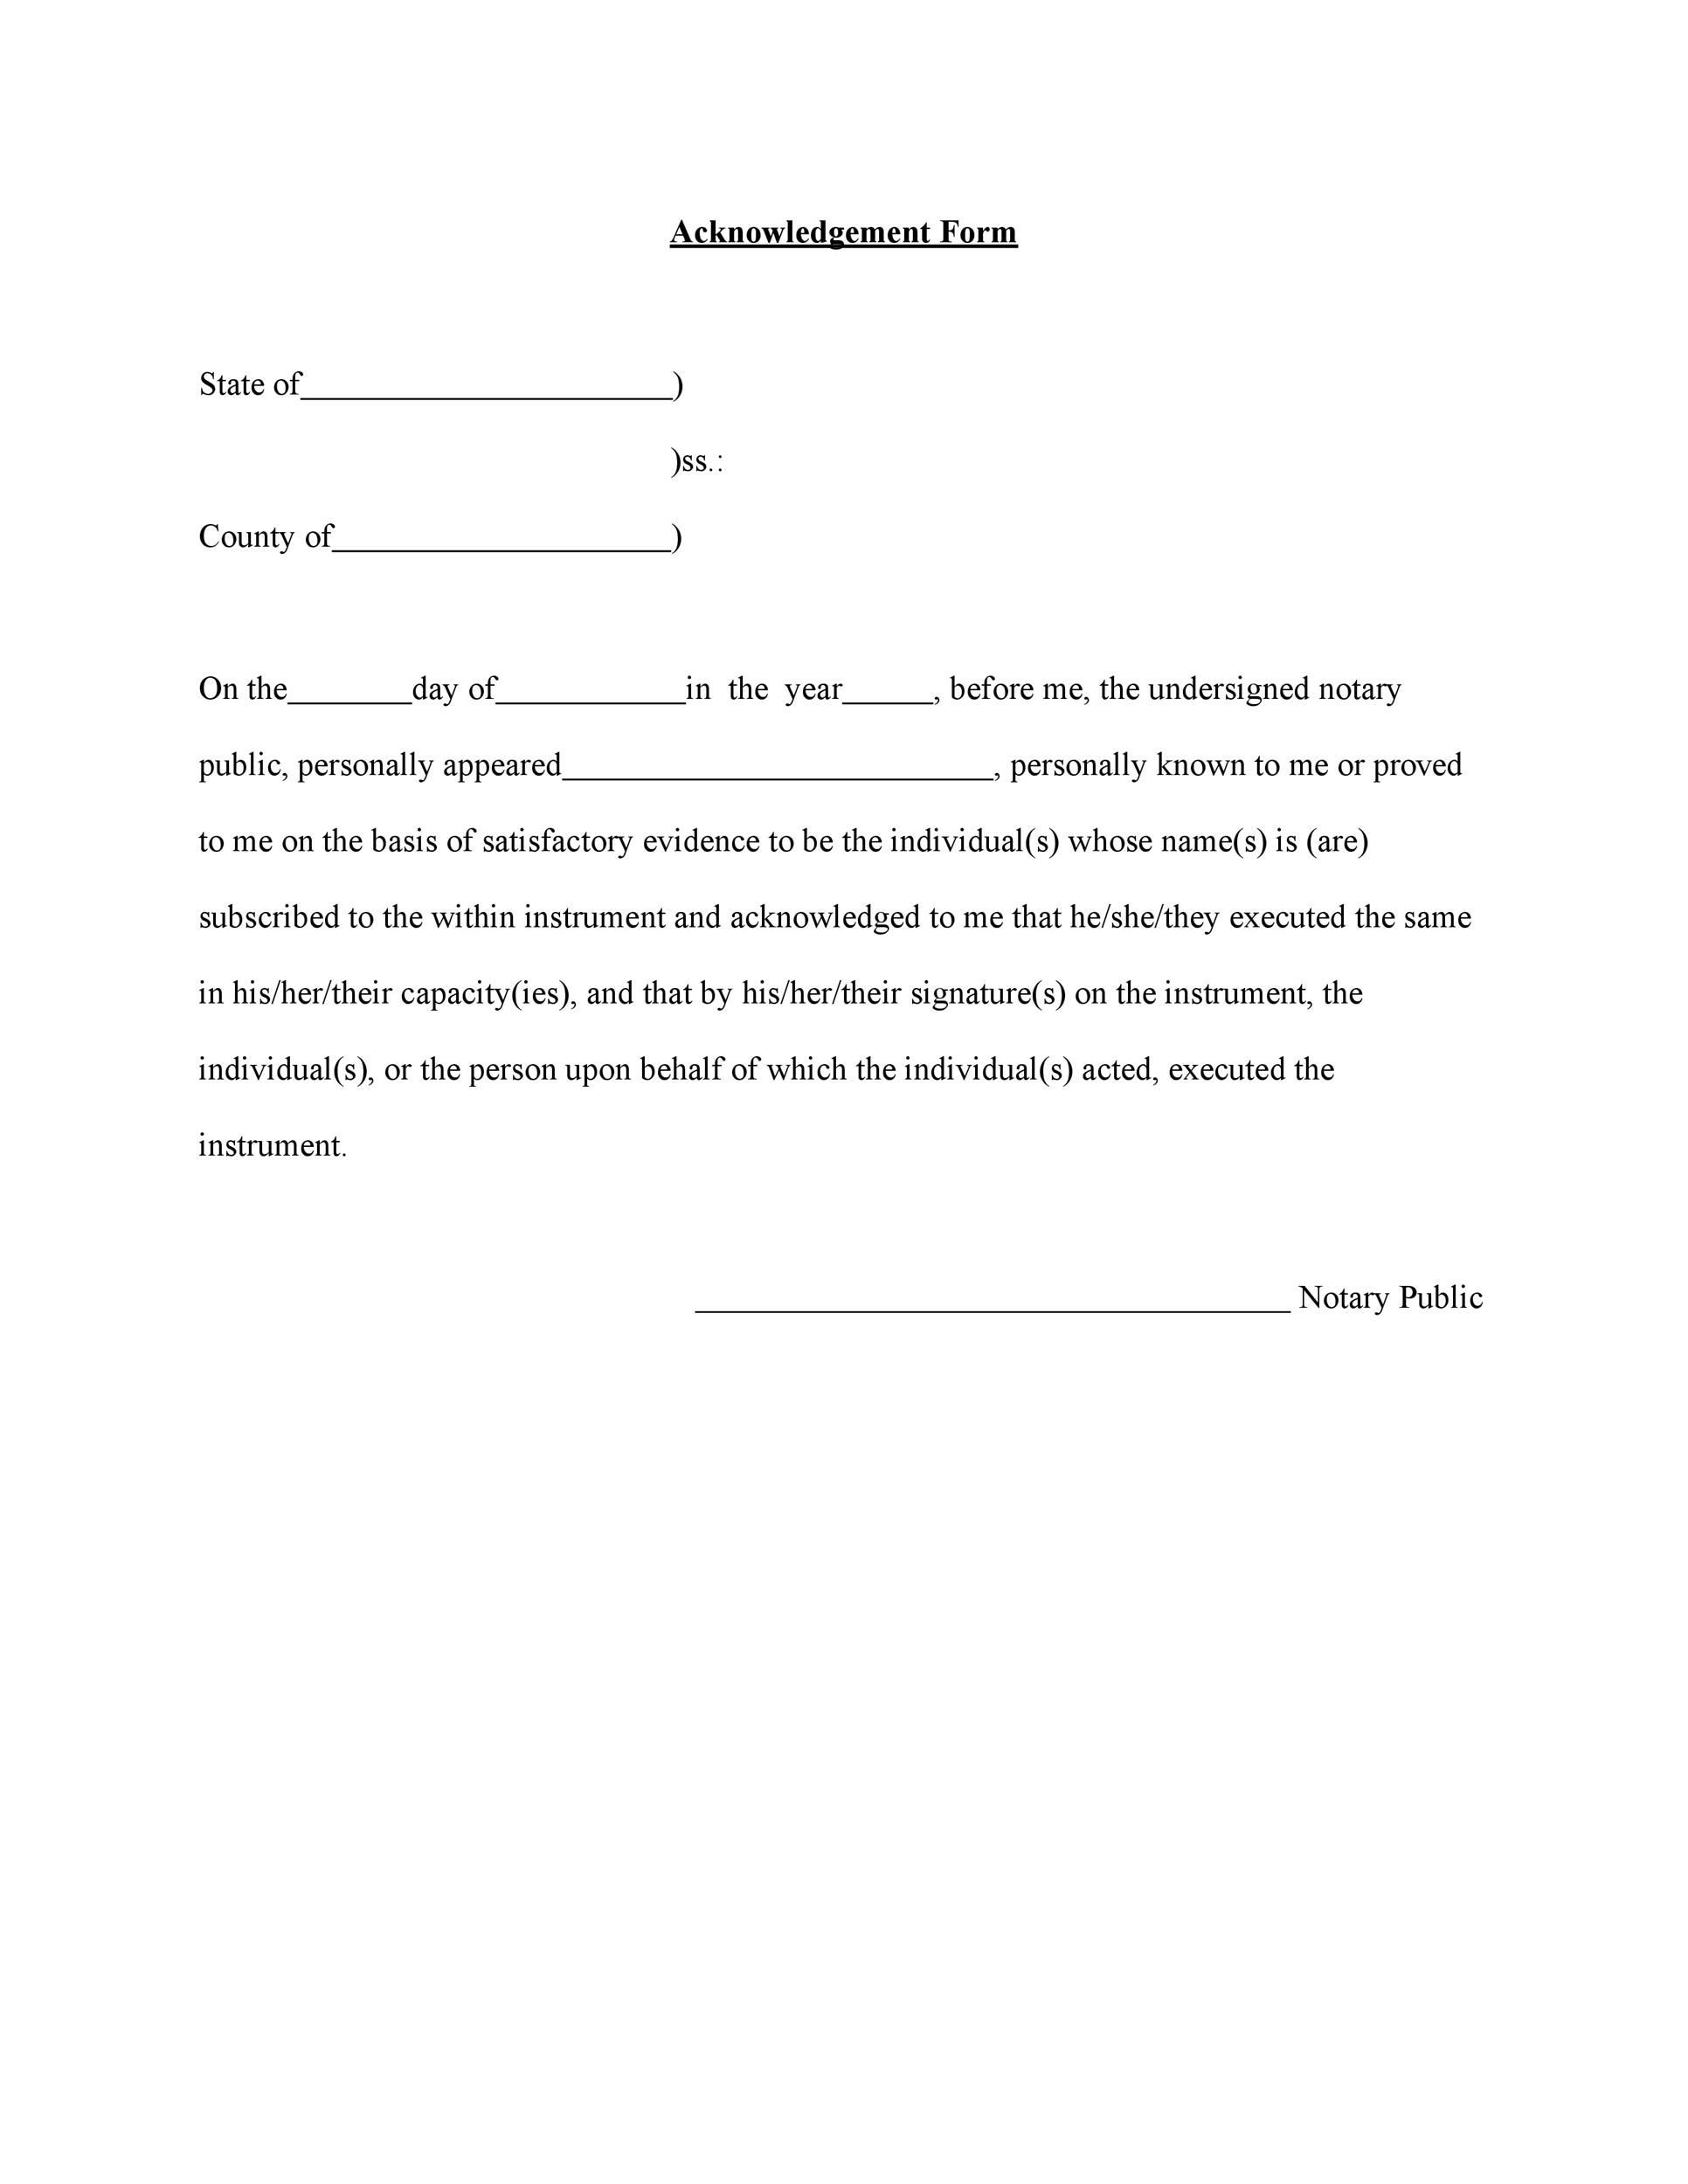 free-notary-acknowledgment-forms-pdf-word-eforms-gambaran